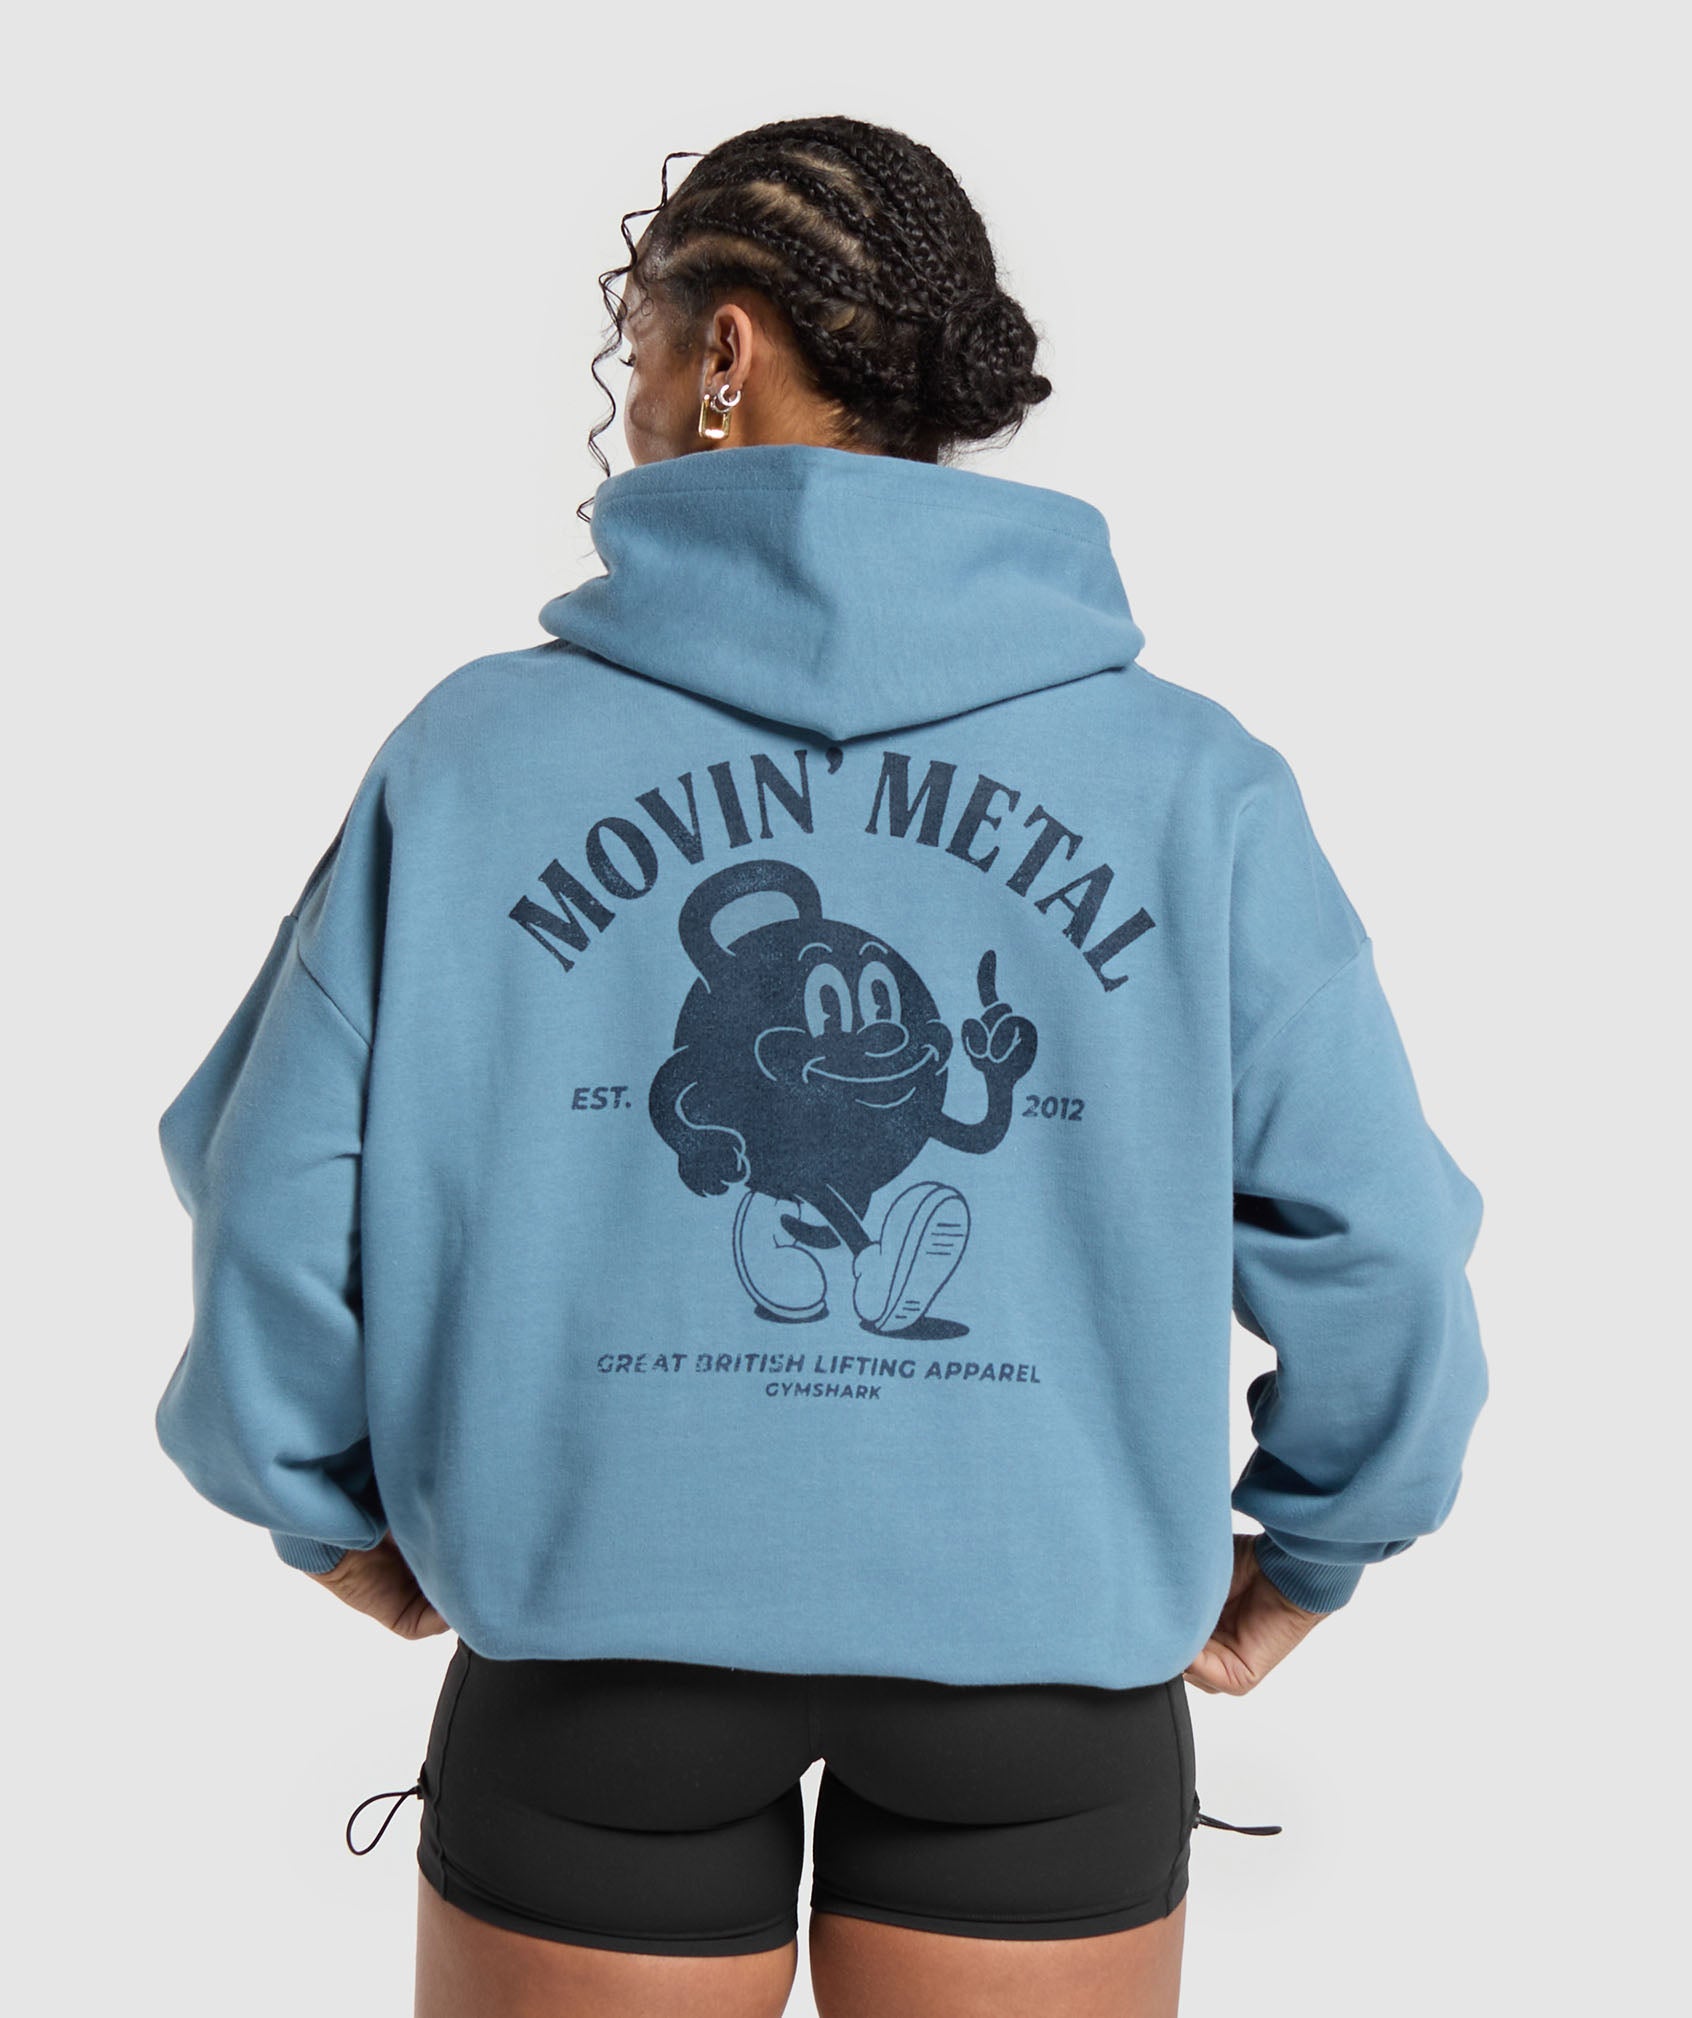 Movin' Metal GFX Hoodie in Faded Blue - view 1